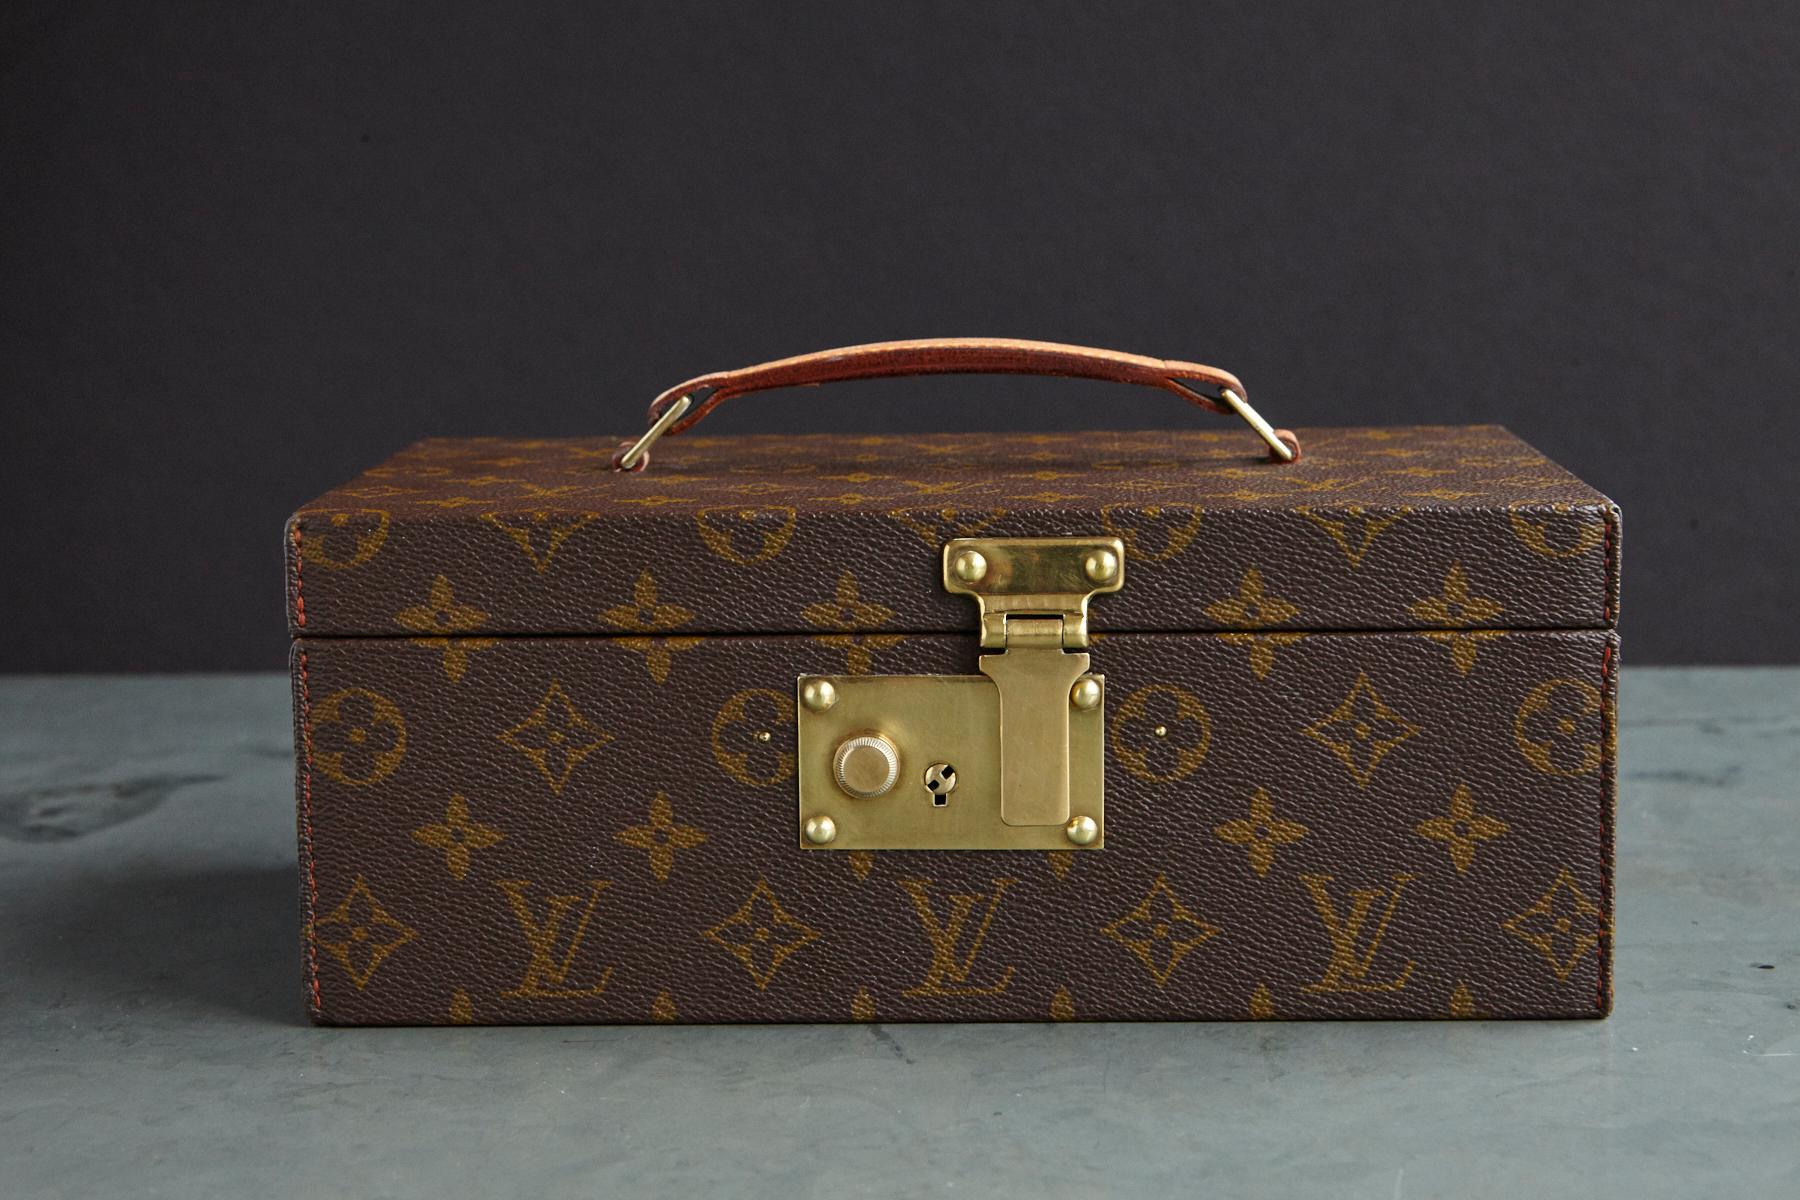 French Louis Vuitton Monogram Vanity or Cosmetic Case from the Collection of Ann Turkel